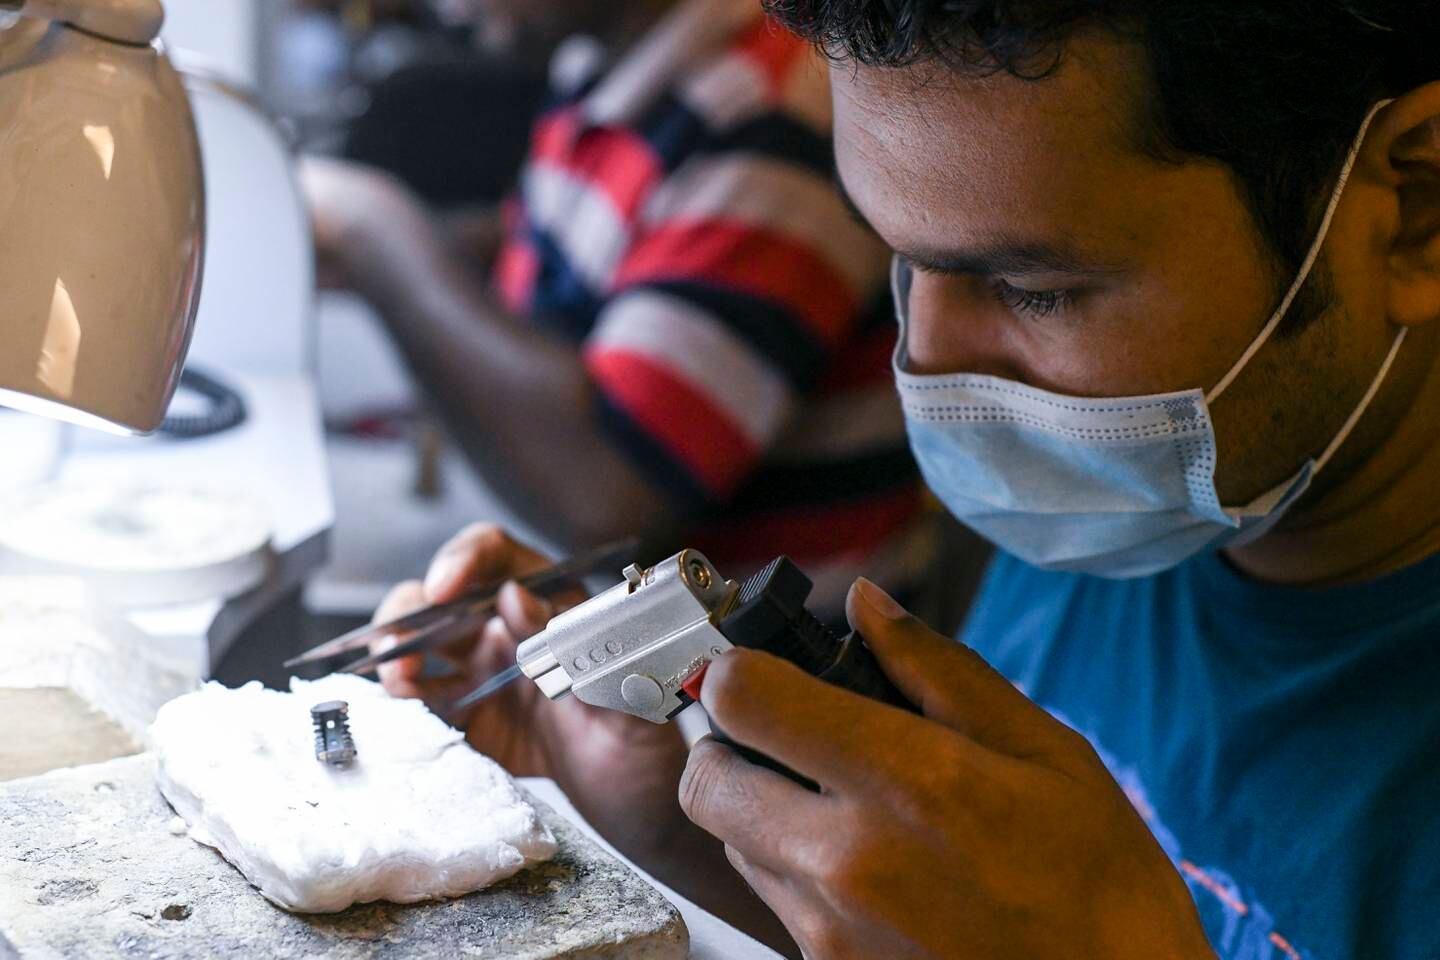 Samir Maity, a skilled craftsman from West Bengal, uses a welding torch for soldering the jewellery item at the Mussafah studio. Khushnum Bhandari / The National
